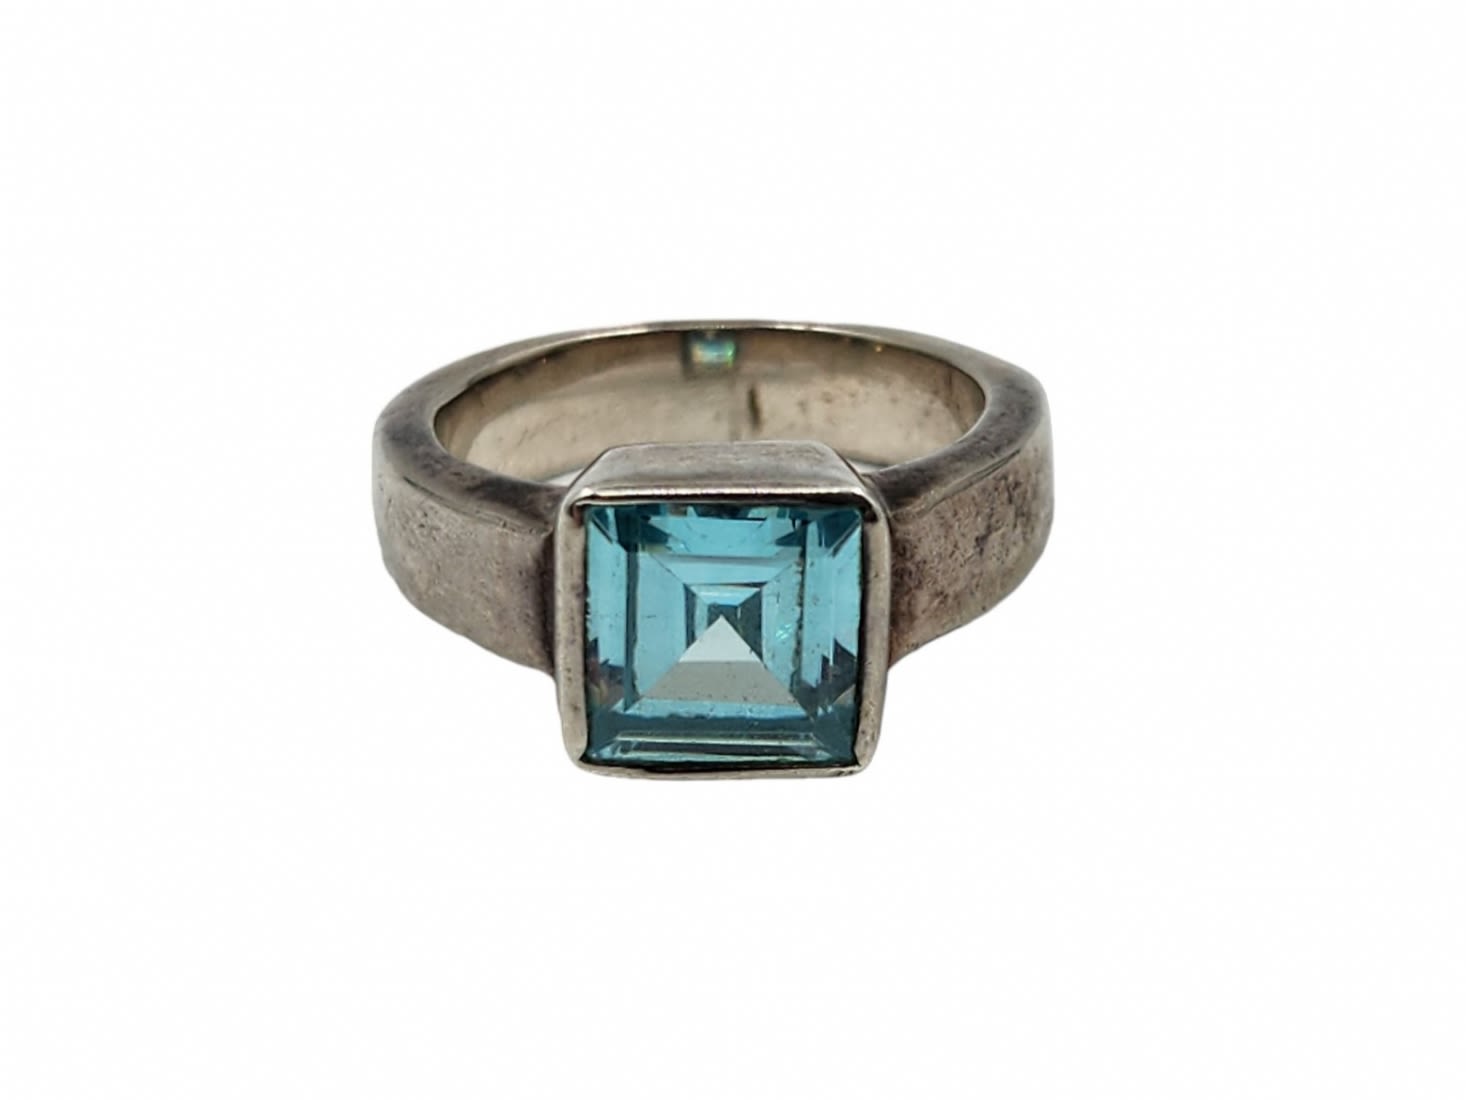 Sterling silver ring, signed: 925, set with an aqua marine stone, the size of the ring according